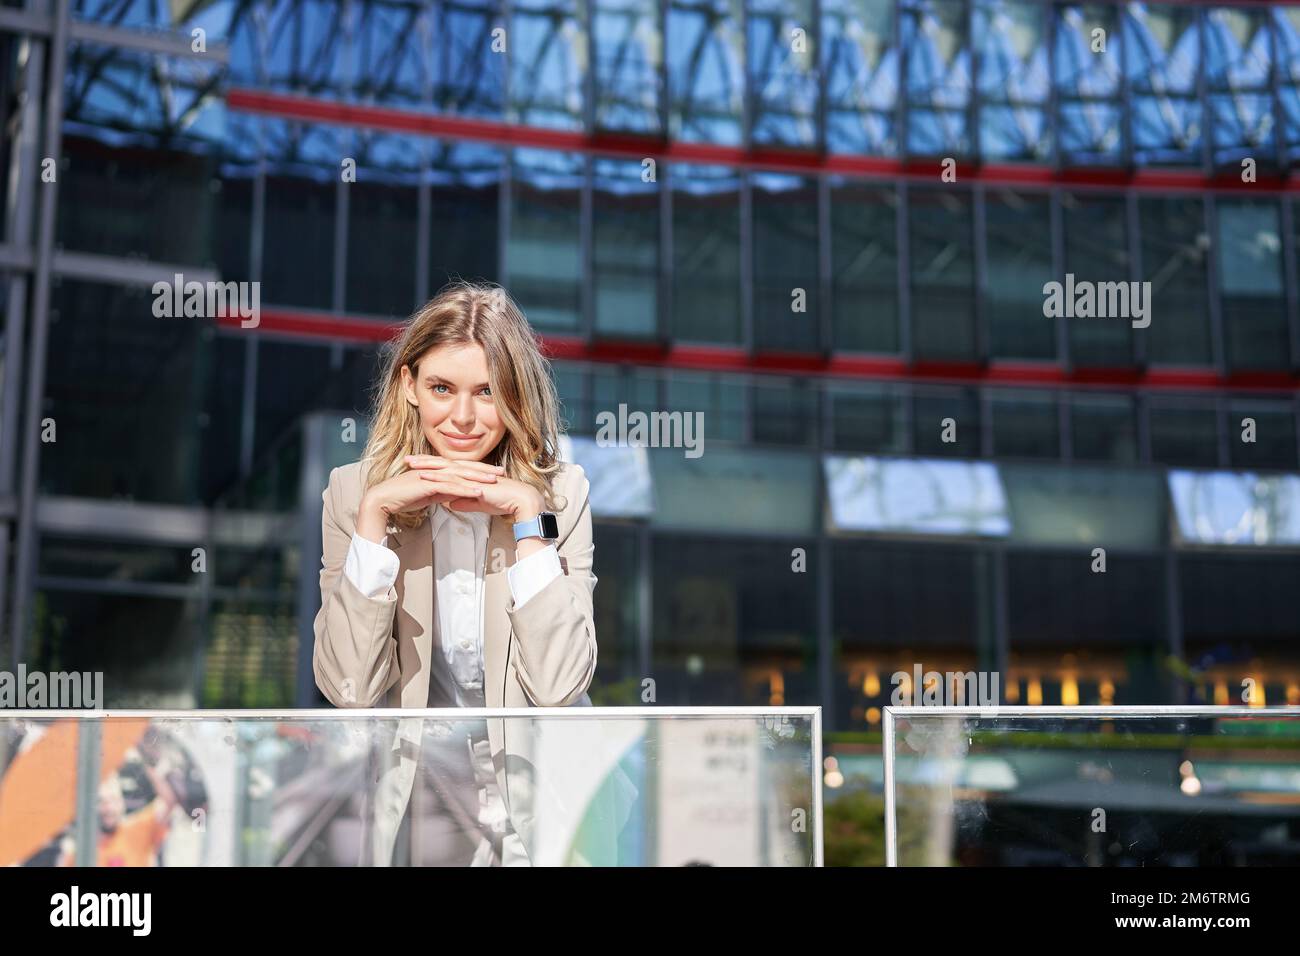 Beautiful young woman in beige suit, standing near office buildings in city center, smiling and looking dreamy Stock Photo